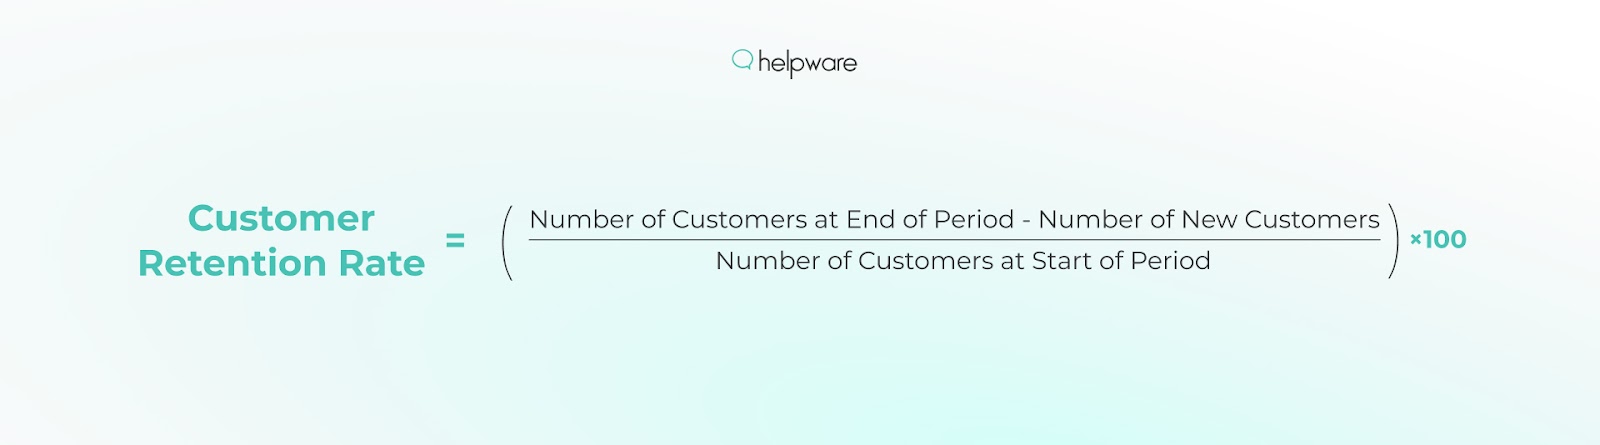 Formula for Customer Retention Rate (CRR)